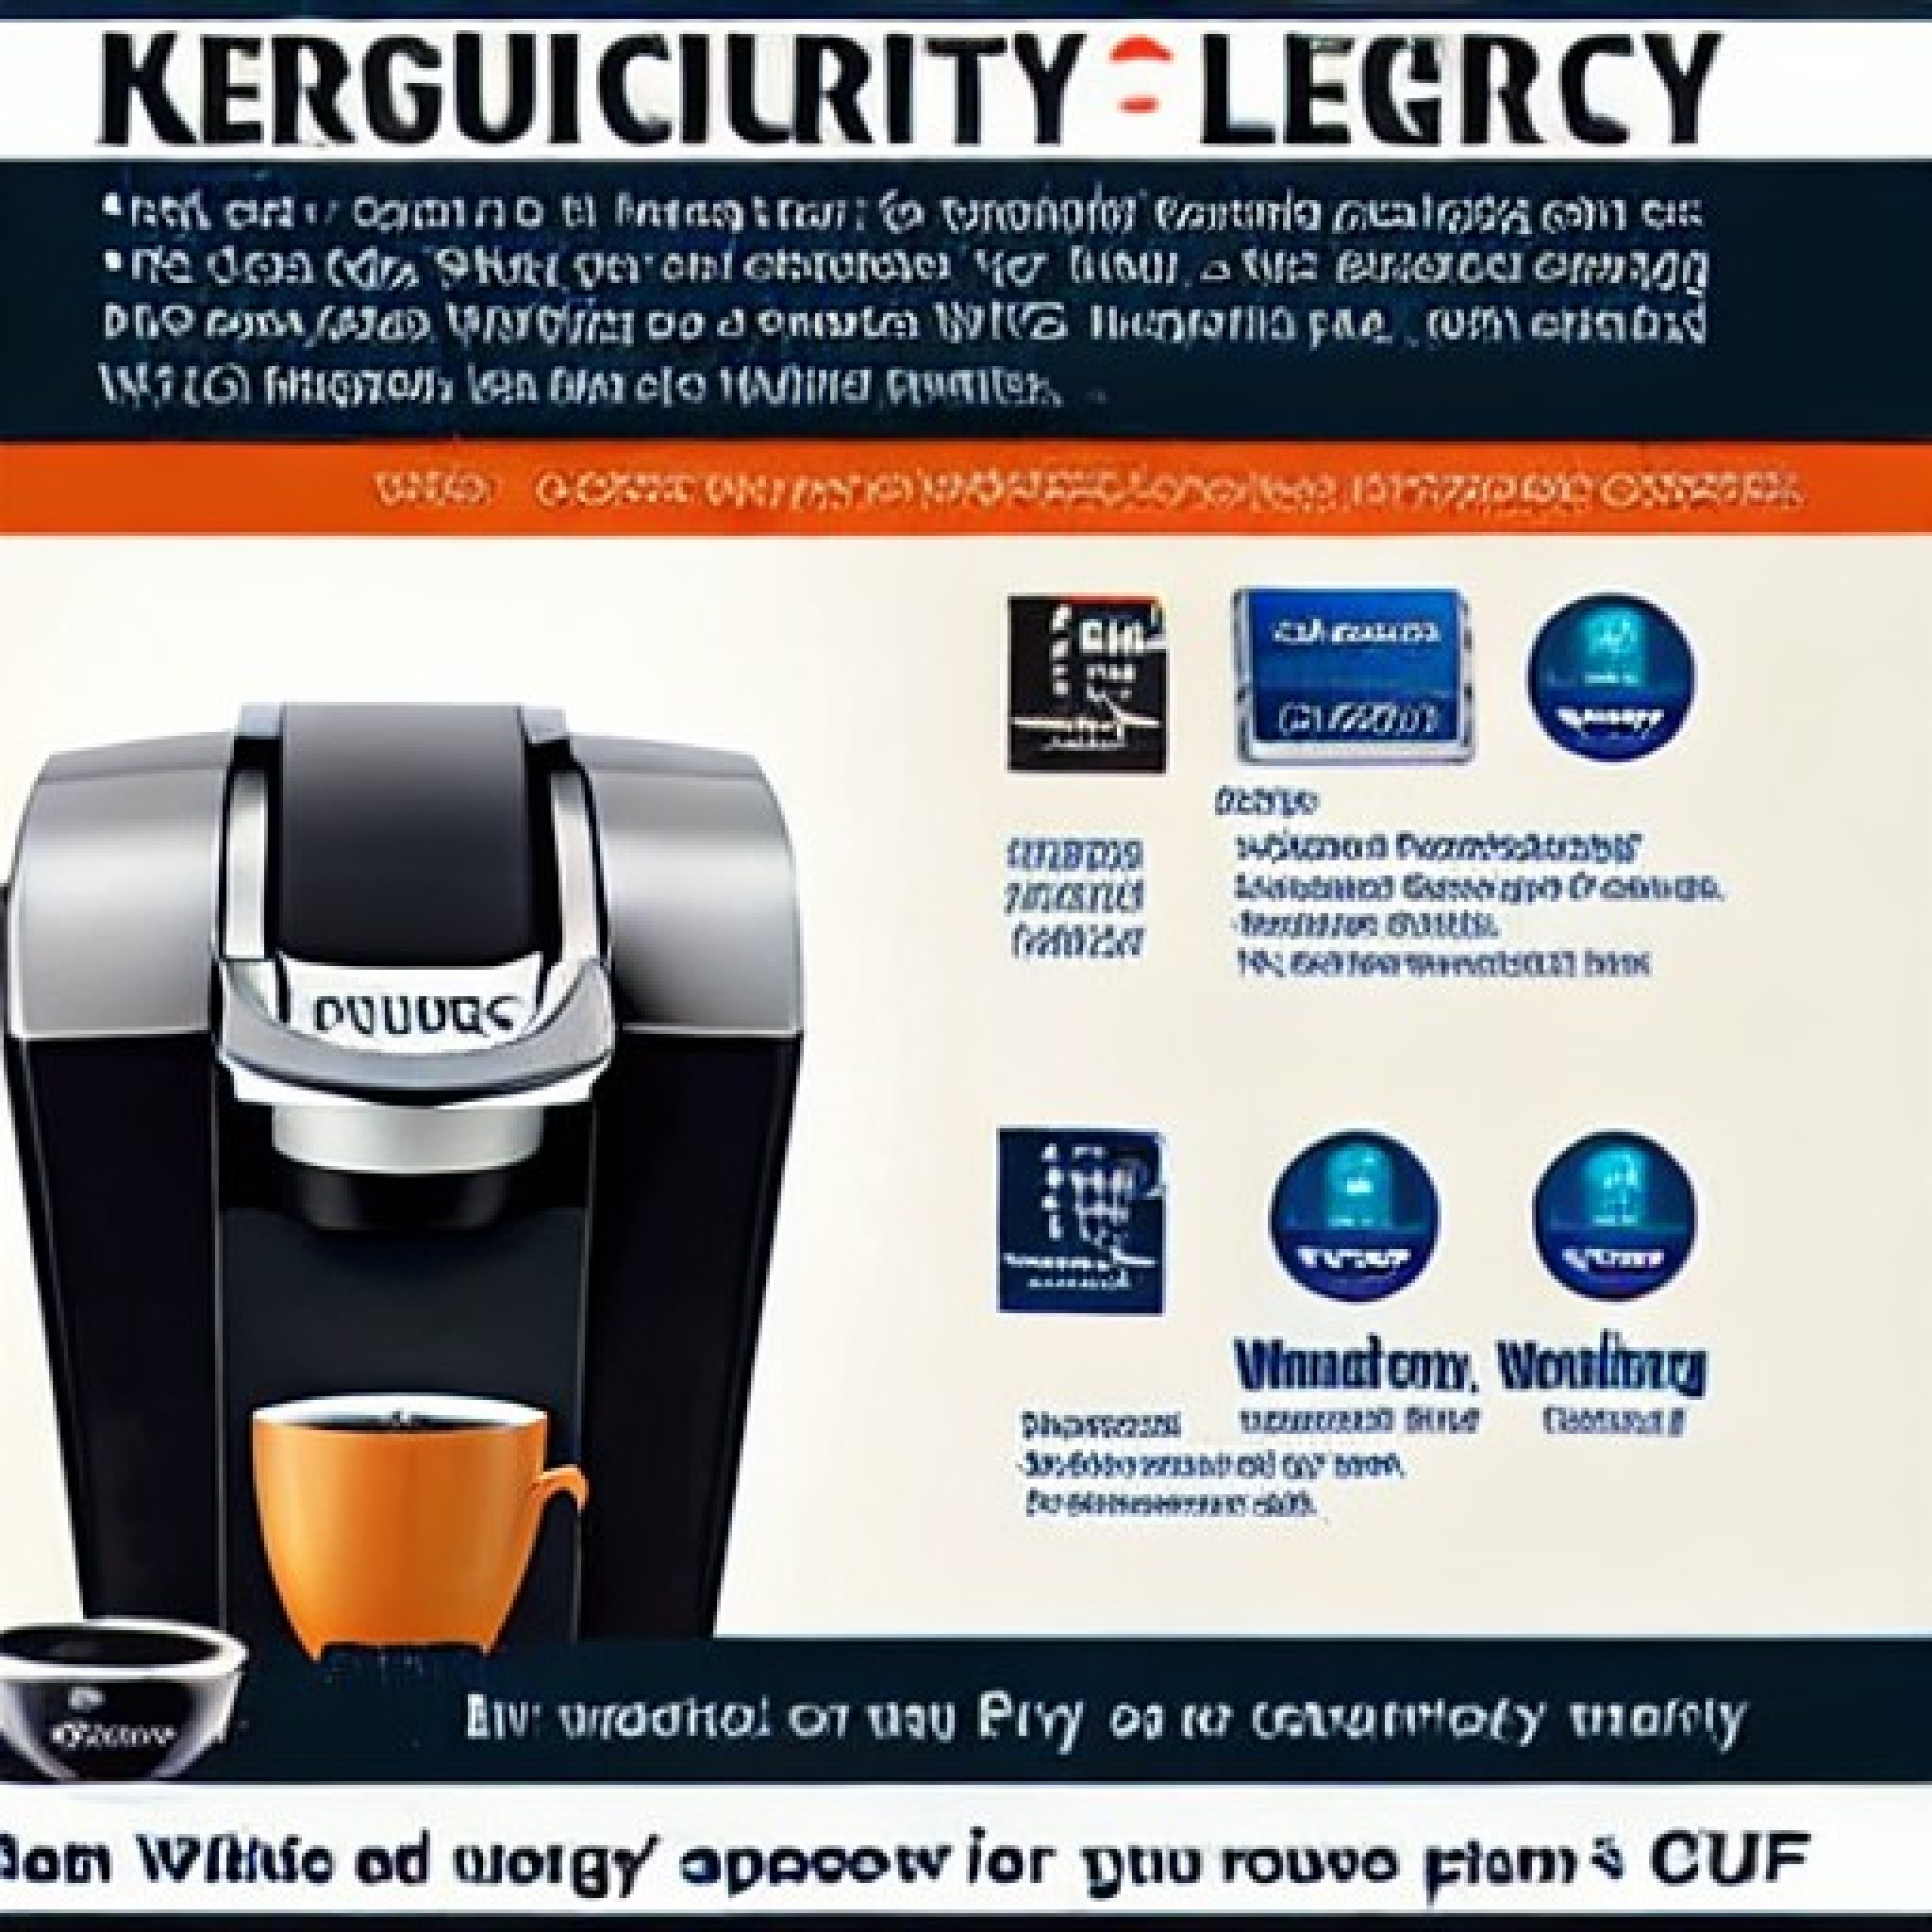 keurig-warranties-how-to-claim-and-get-your-refund